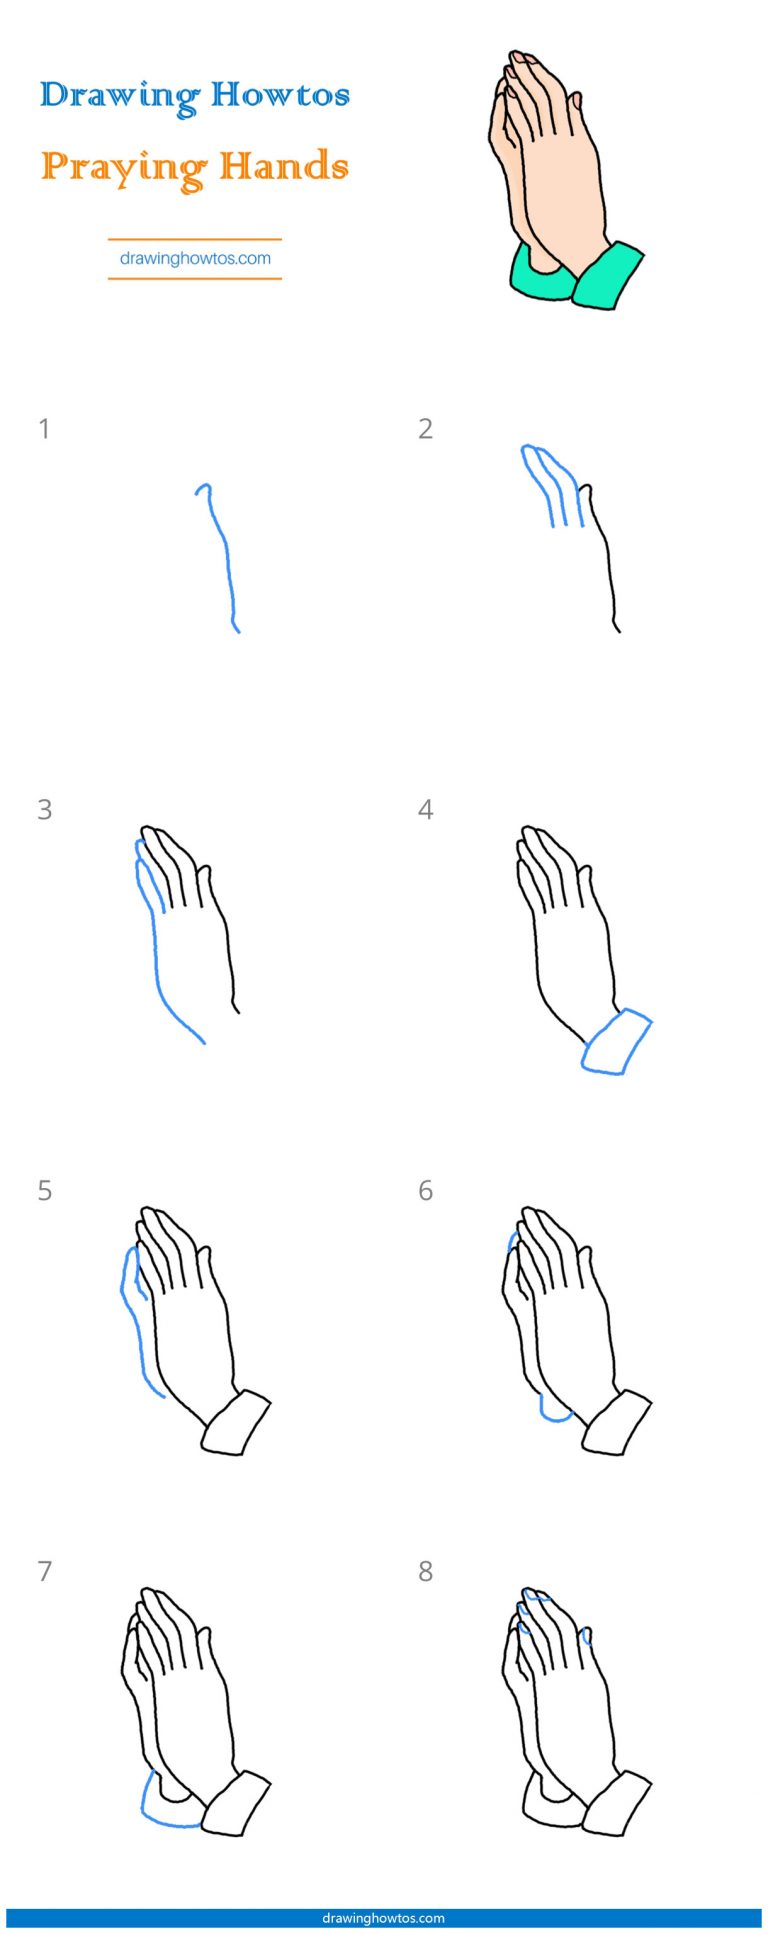 Best How To Draw Hands Praying Step By Step  The ultimate guide 